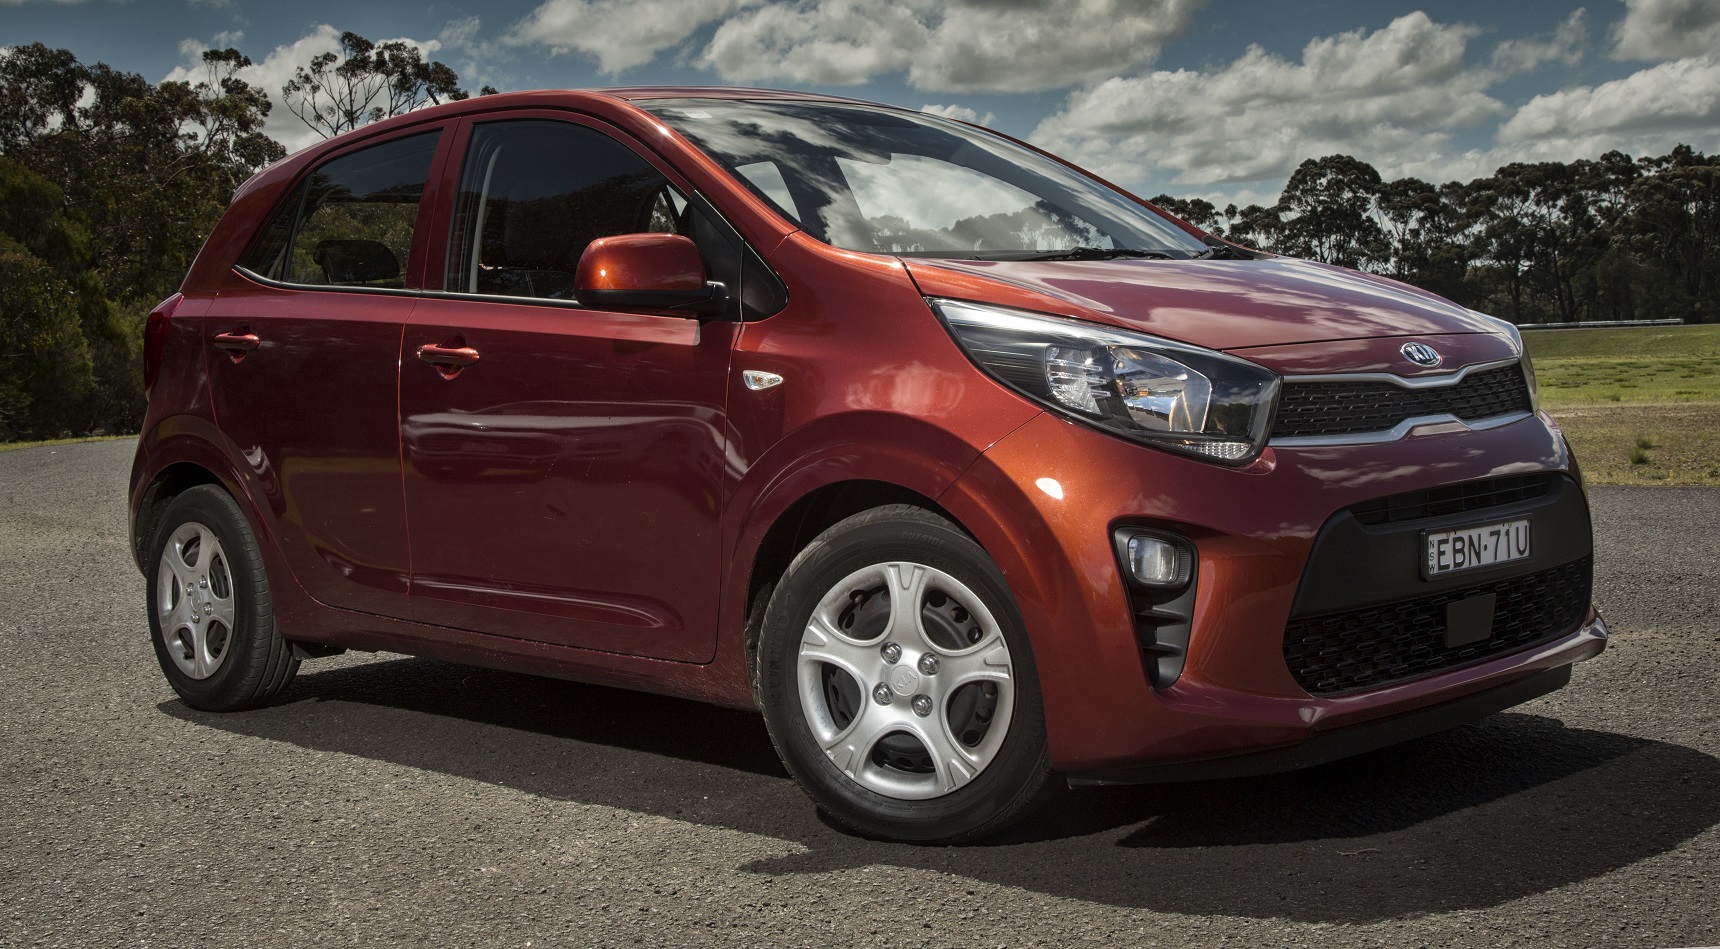 The tiny Picanto packs a punch.